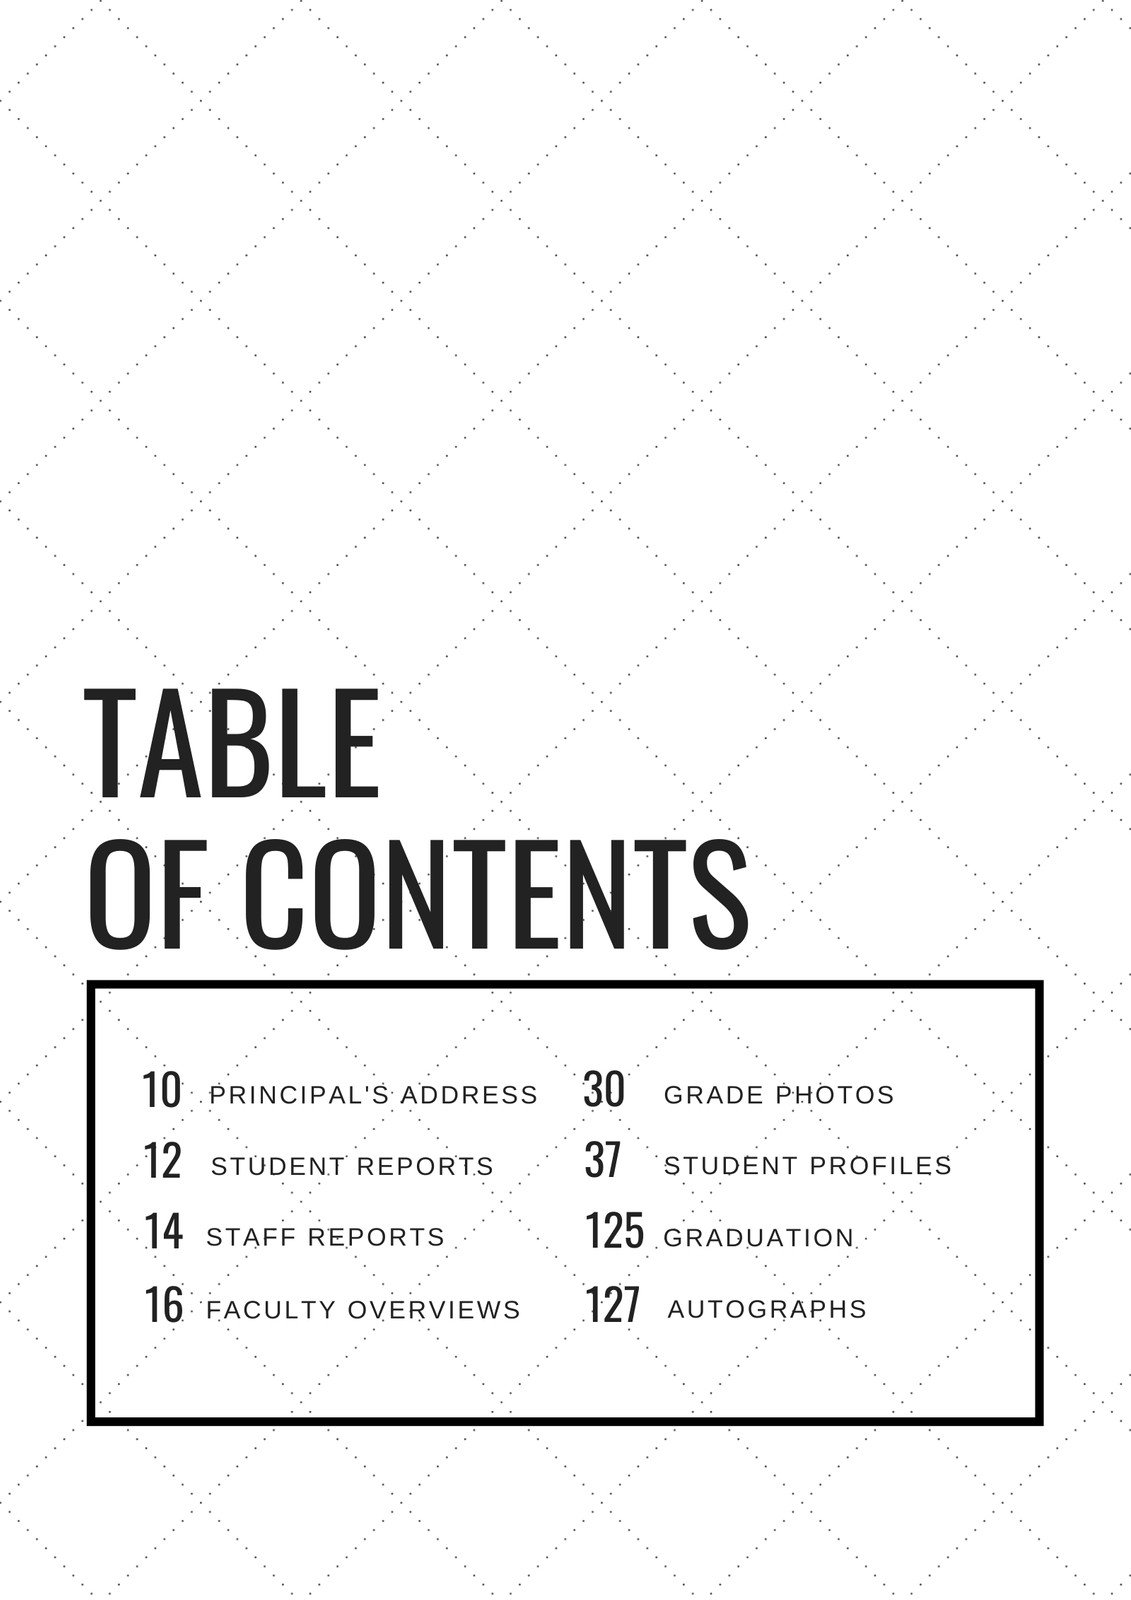 Free And Customizable Table Of Contents Templates Canva Cute table of contents template